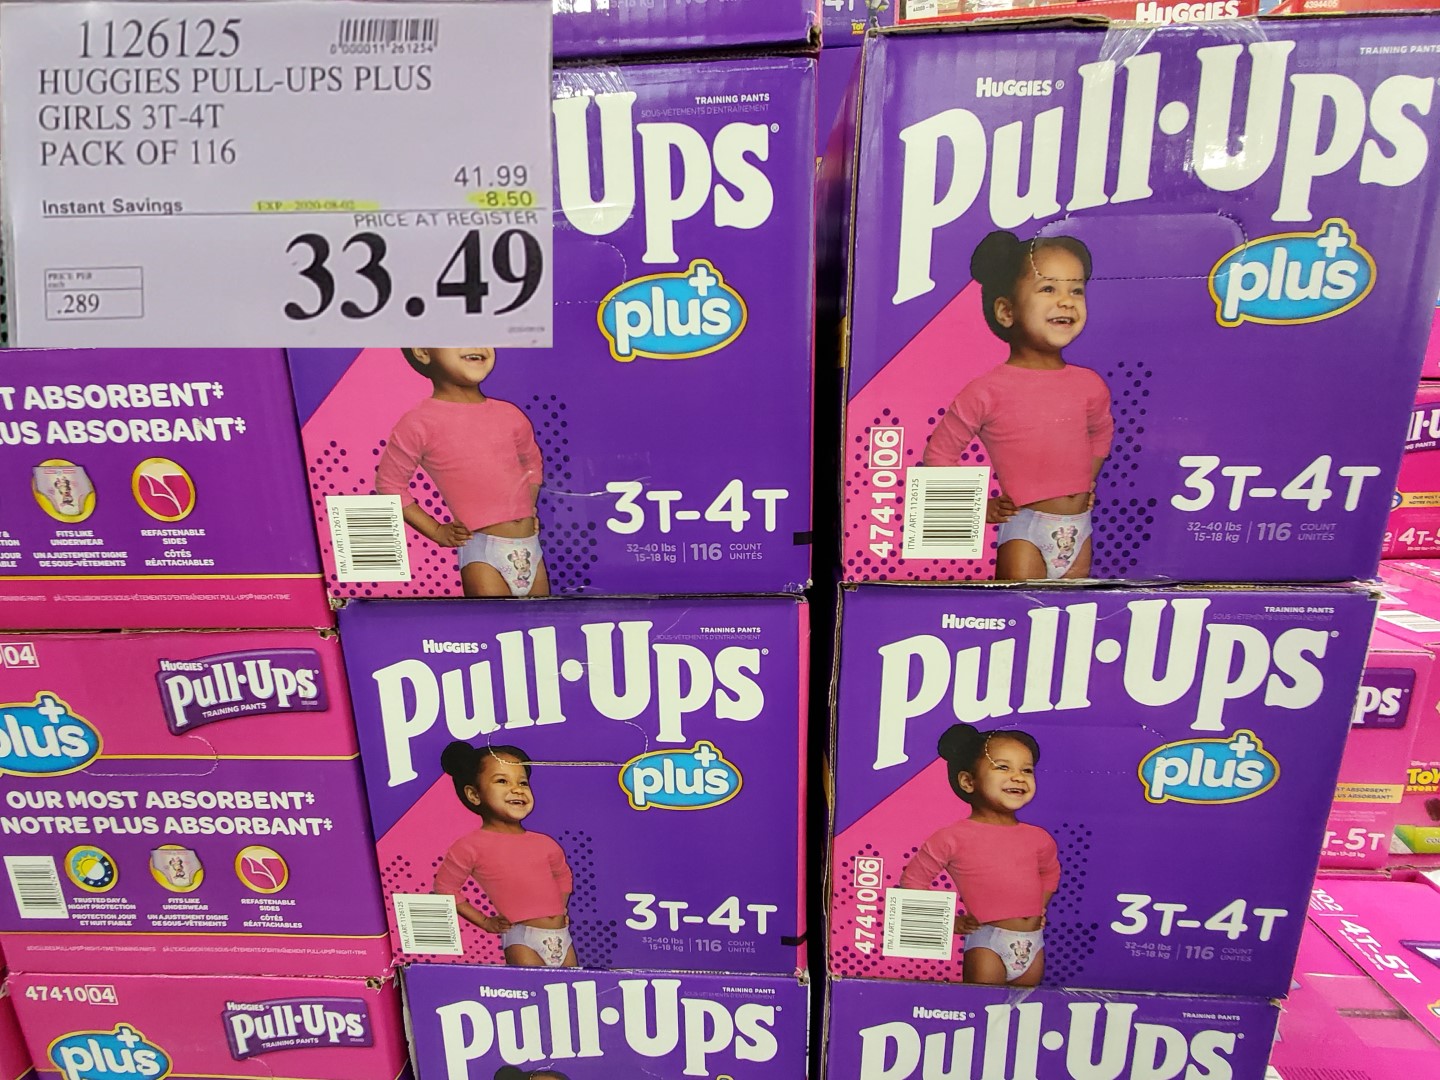 Huggies Pull Ups Plus Sale at Costco 🇨🇦! Sale ends Feb 25! Available